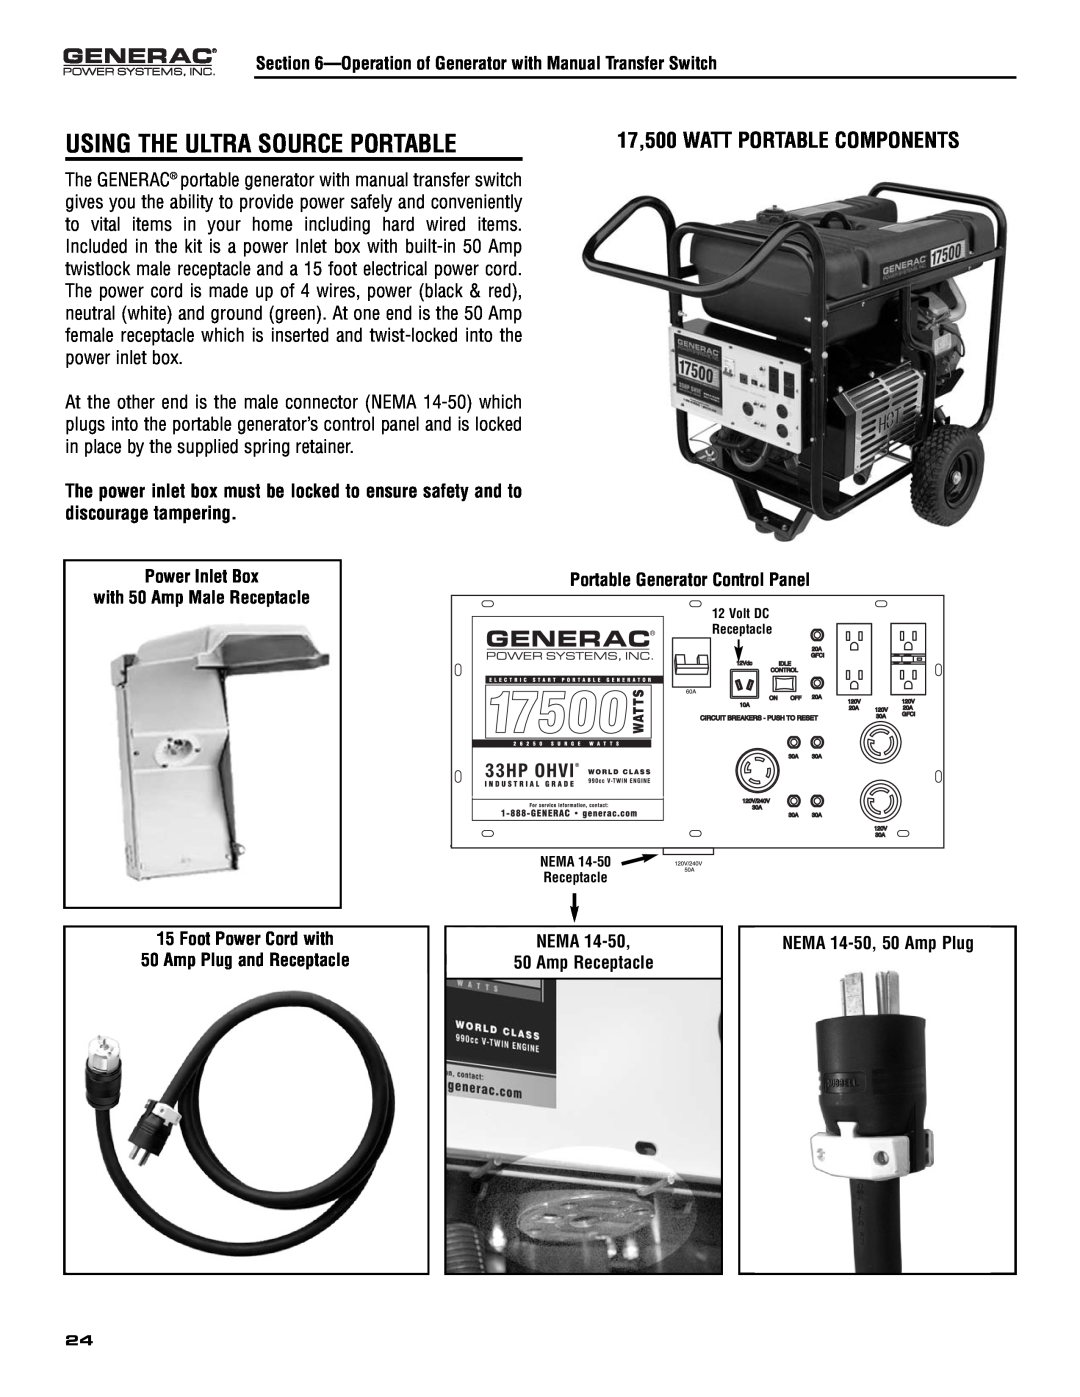 Generac 005308-0 owner manual Using The Ultra Source Portable, 17,500 WATT PORTABLE COMPONENTS, Amp Plug and Receptacle 